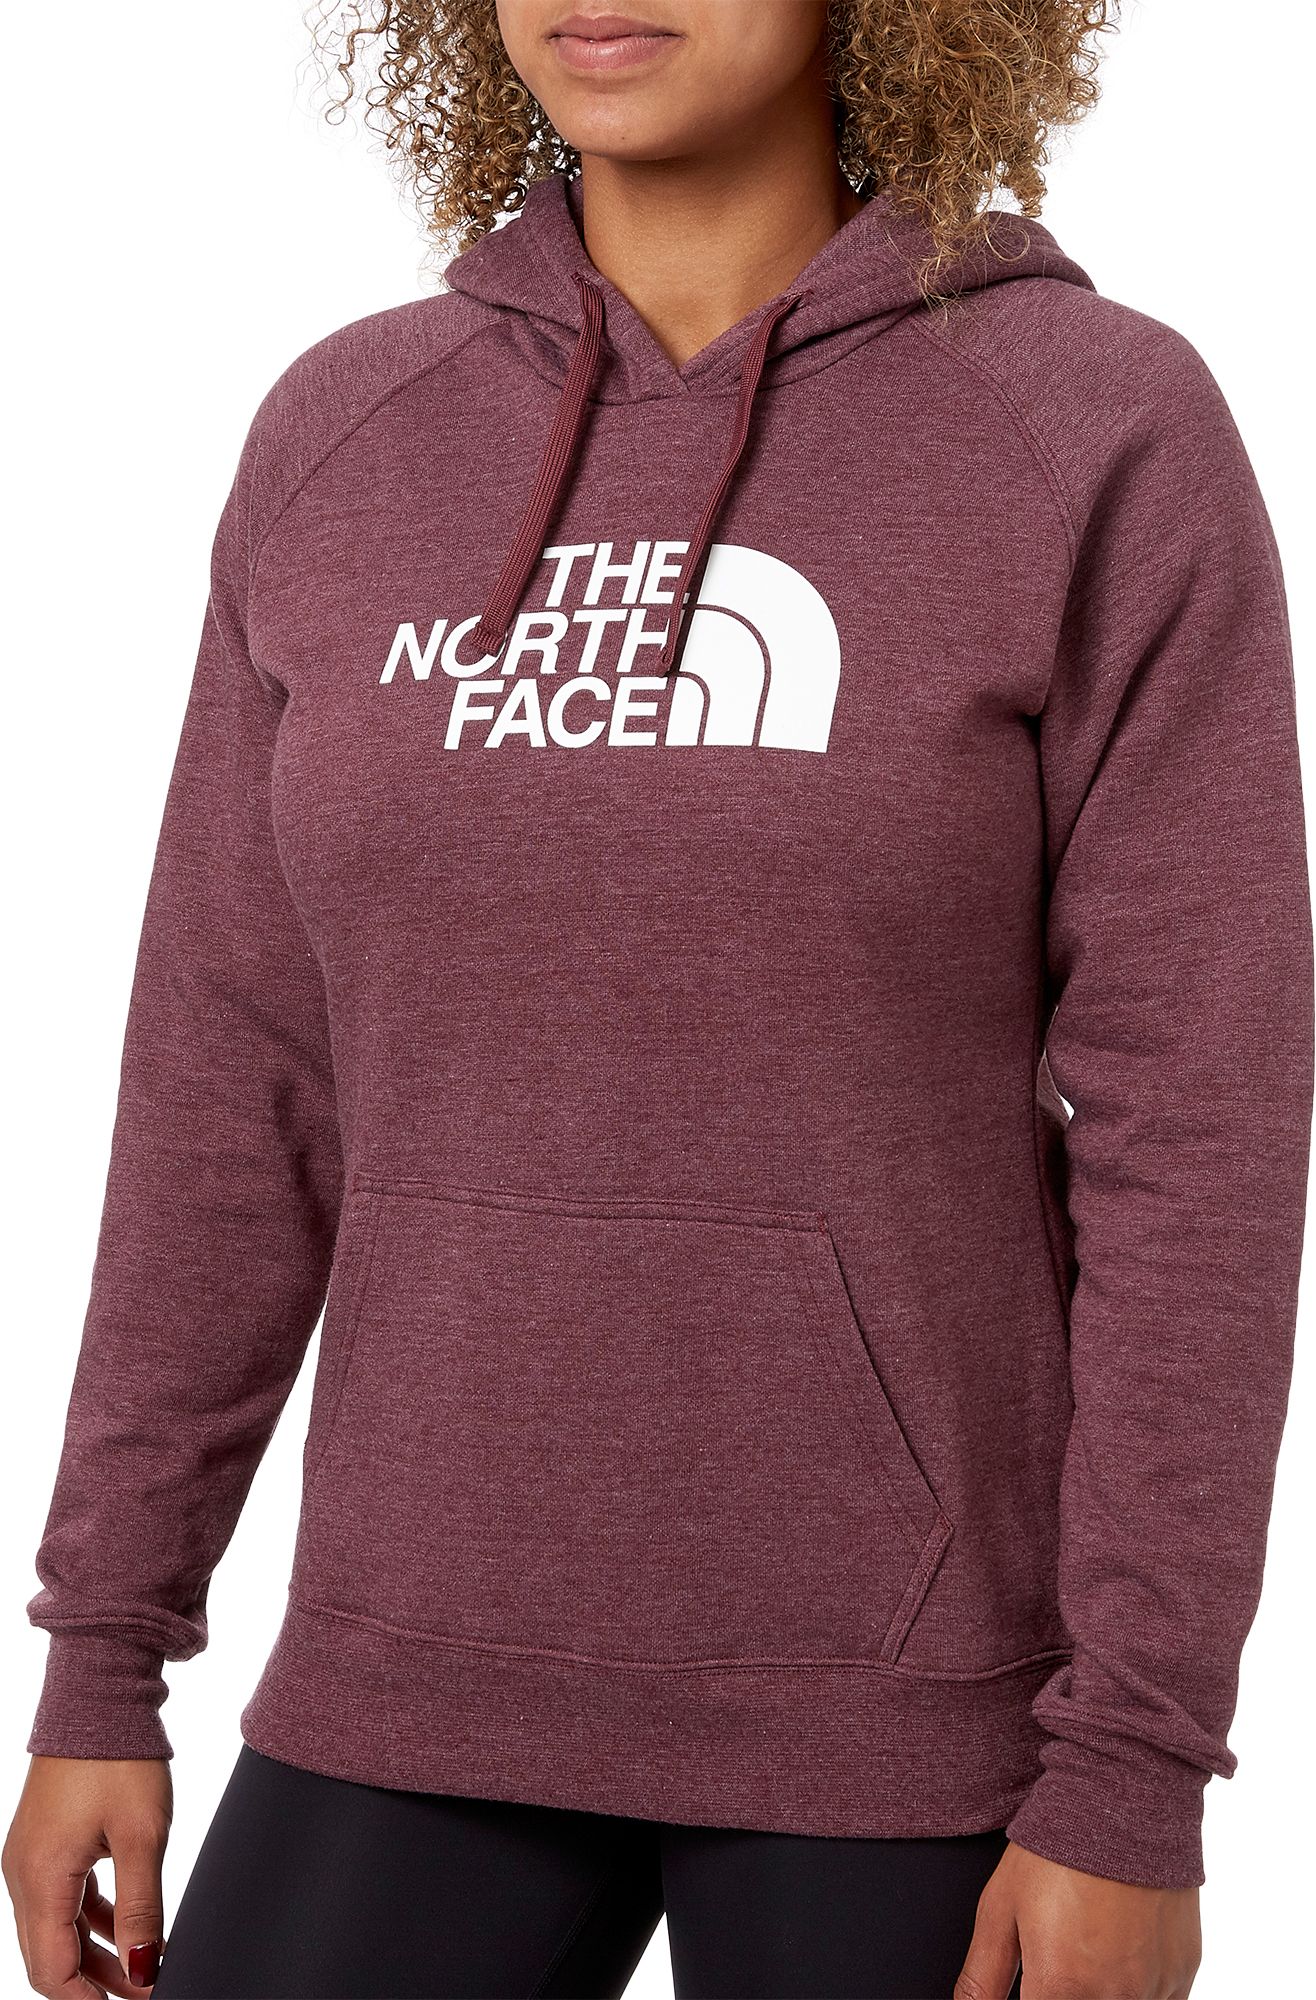 north face hoodie white